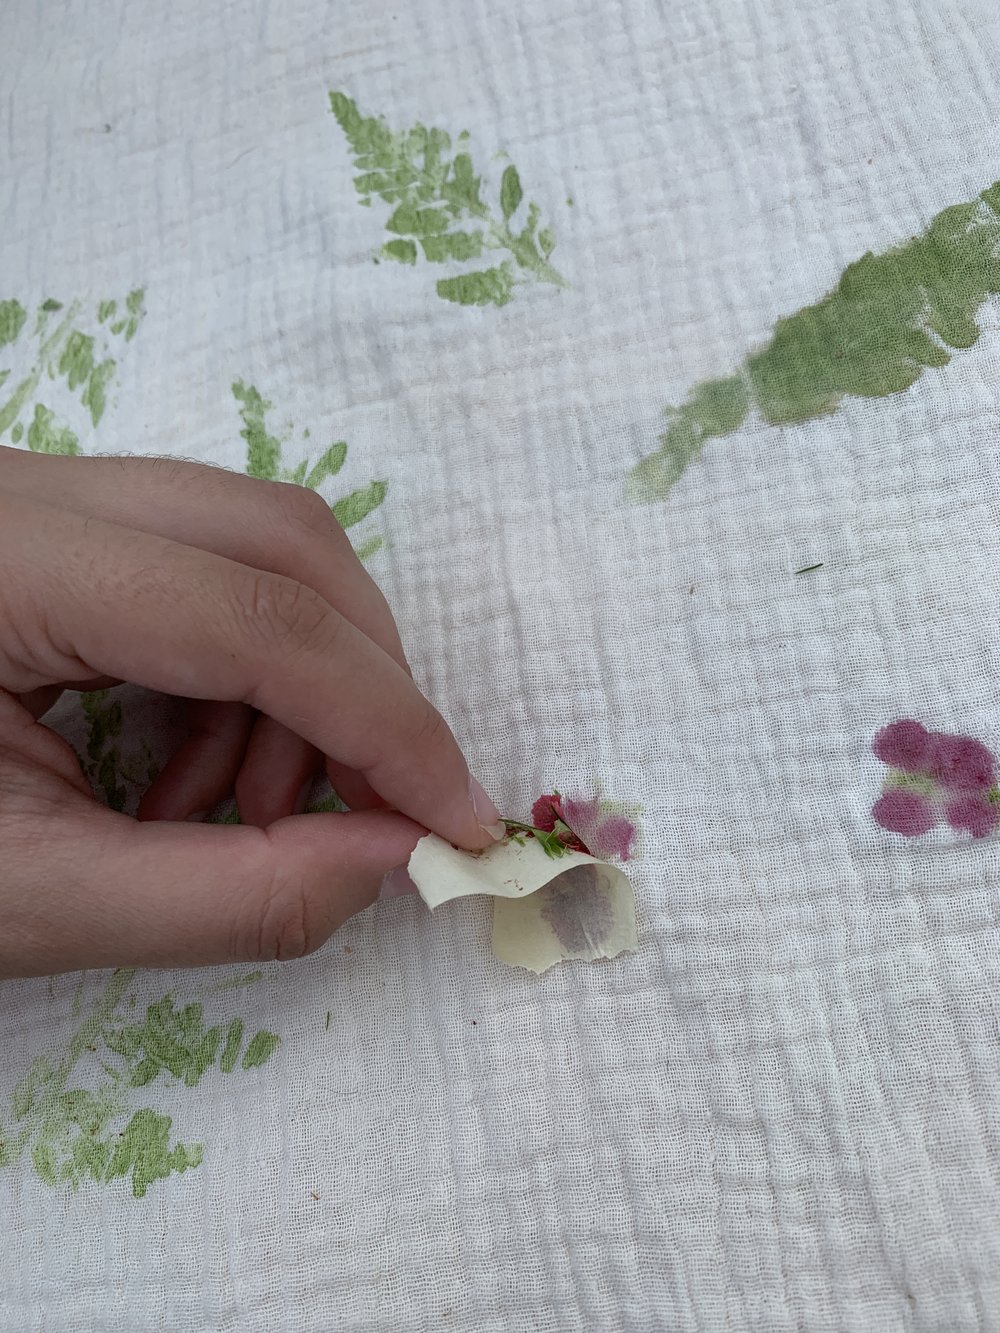 Using tape, peel off any flower residue